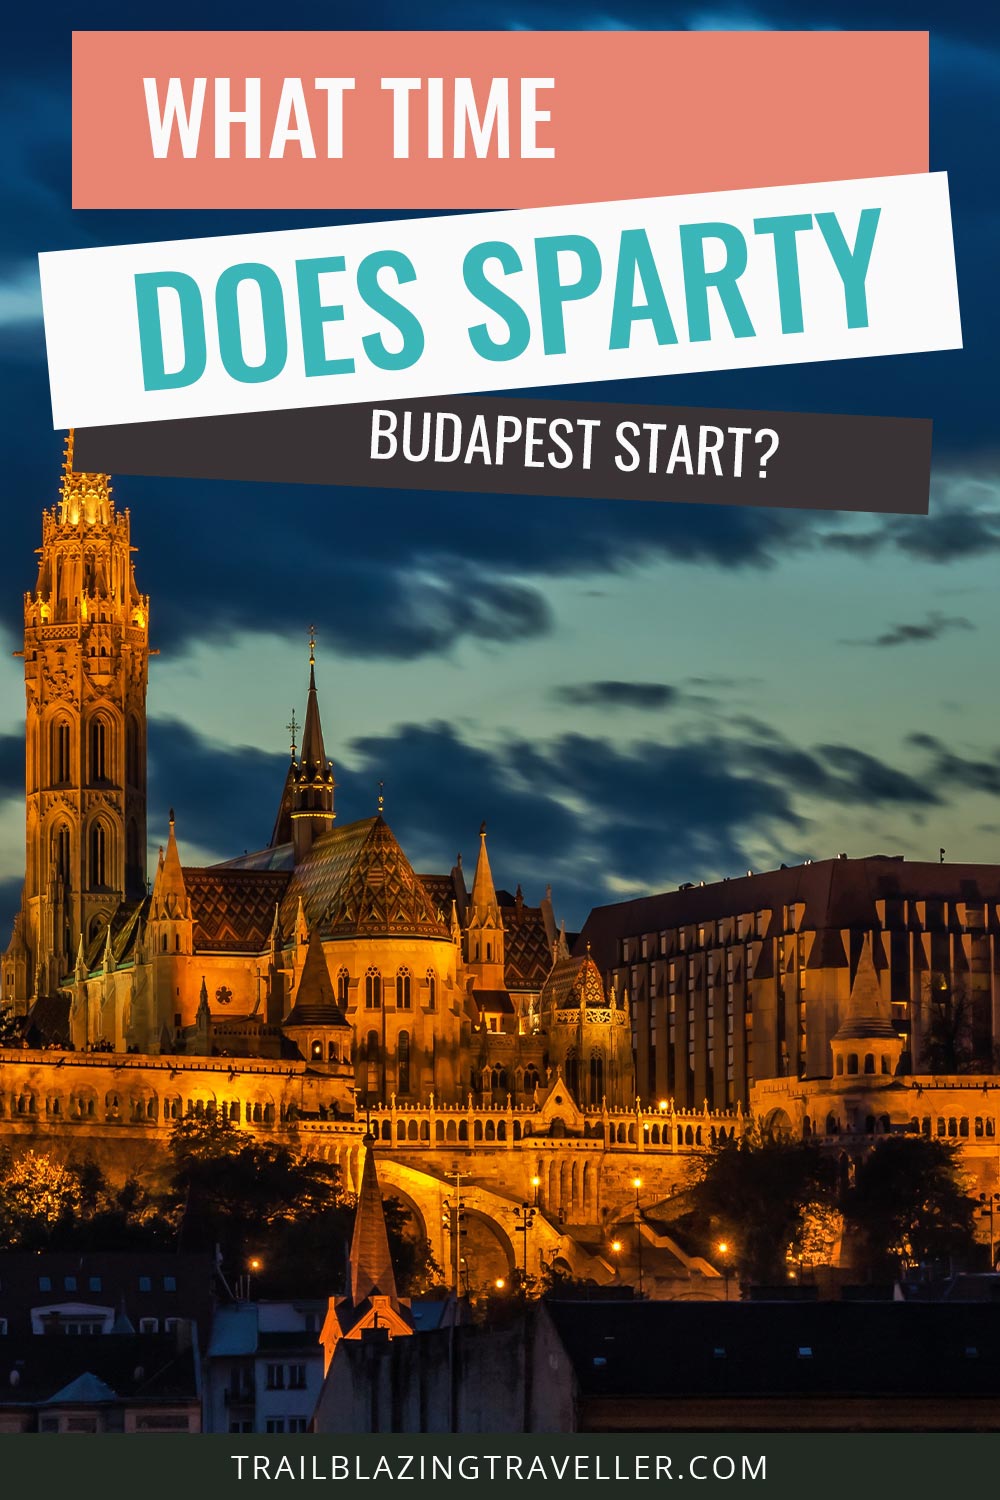 What Time Does Sparty Budapest Start?